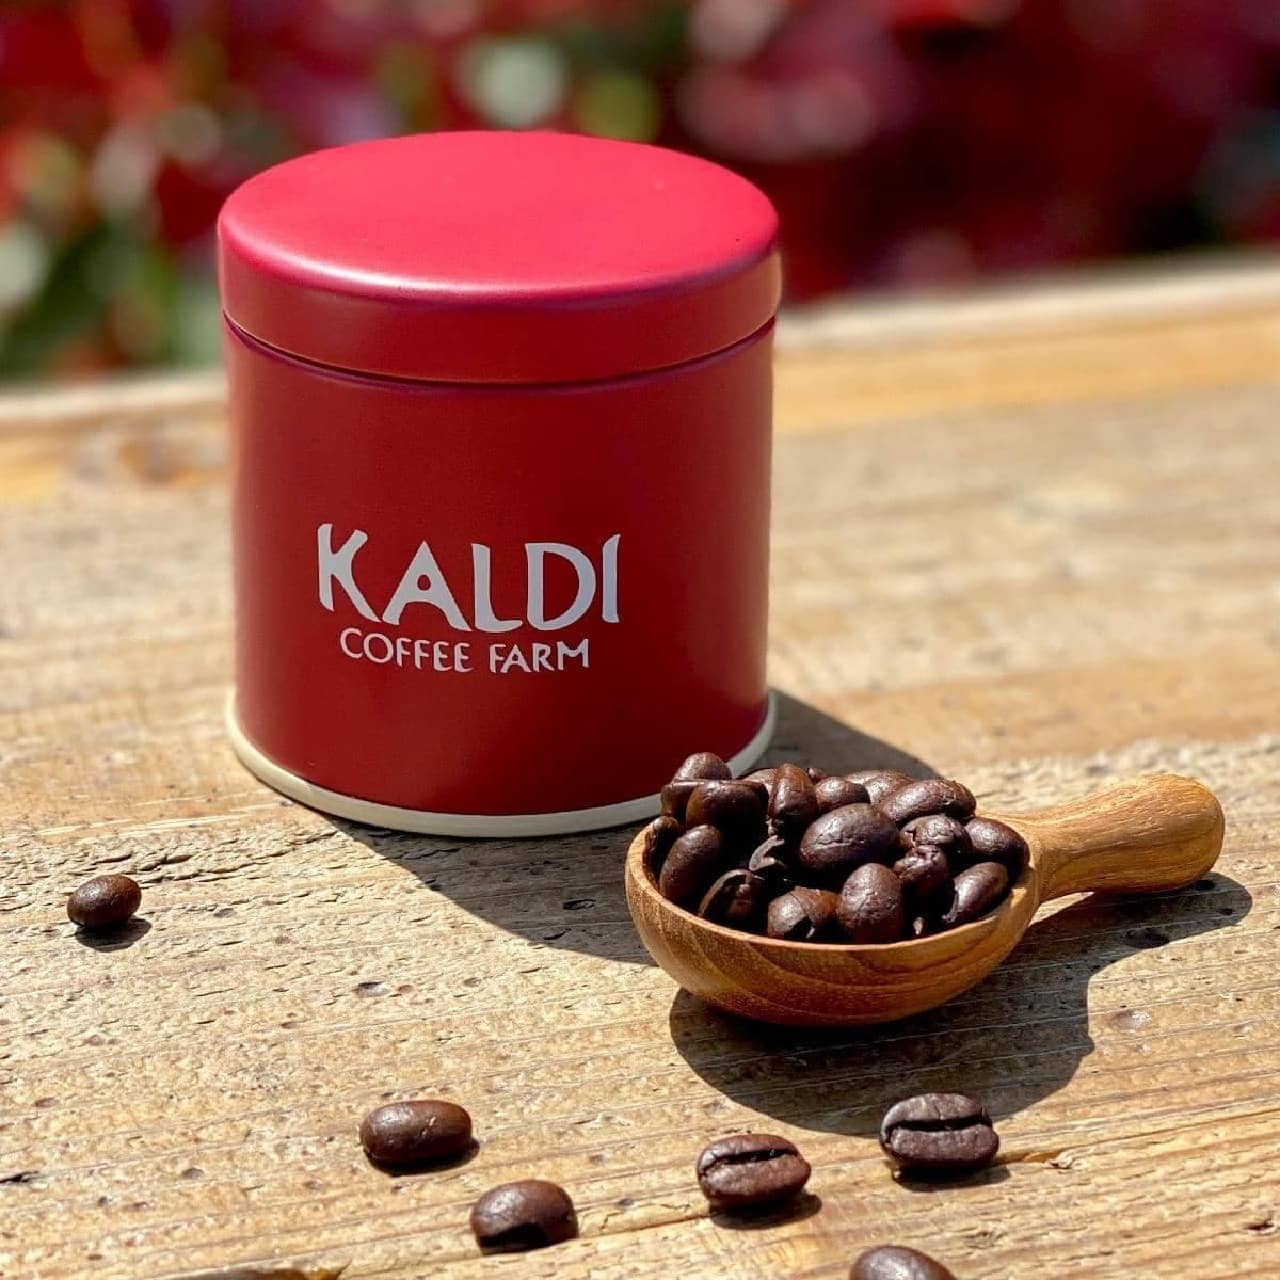 KALDI "Mini Canister Can" Present with coffee purchase